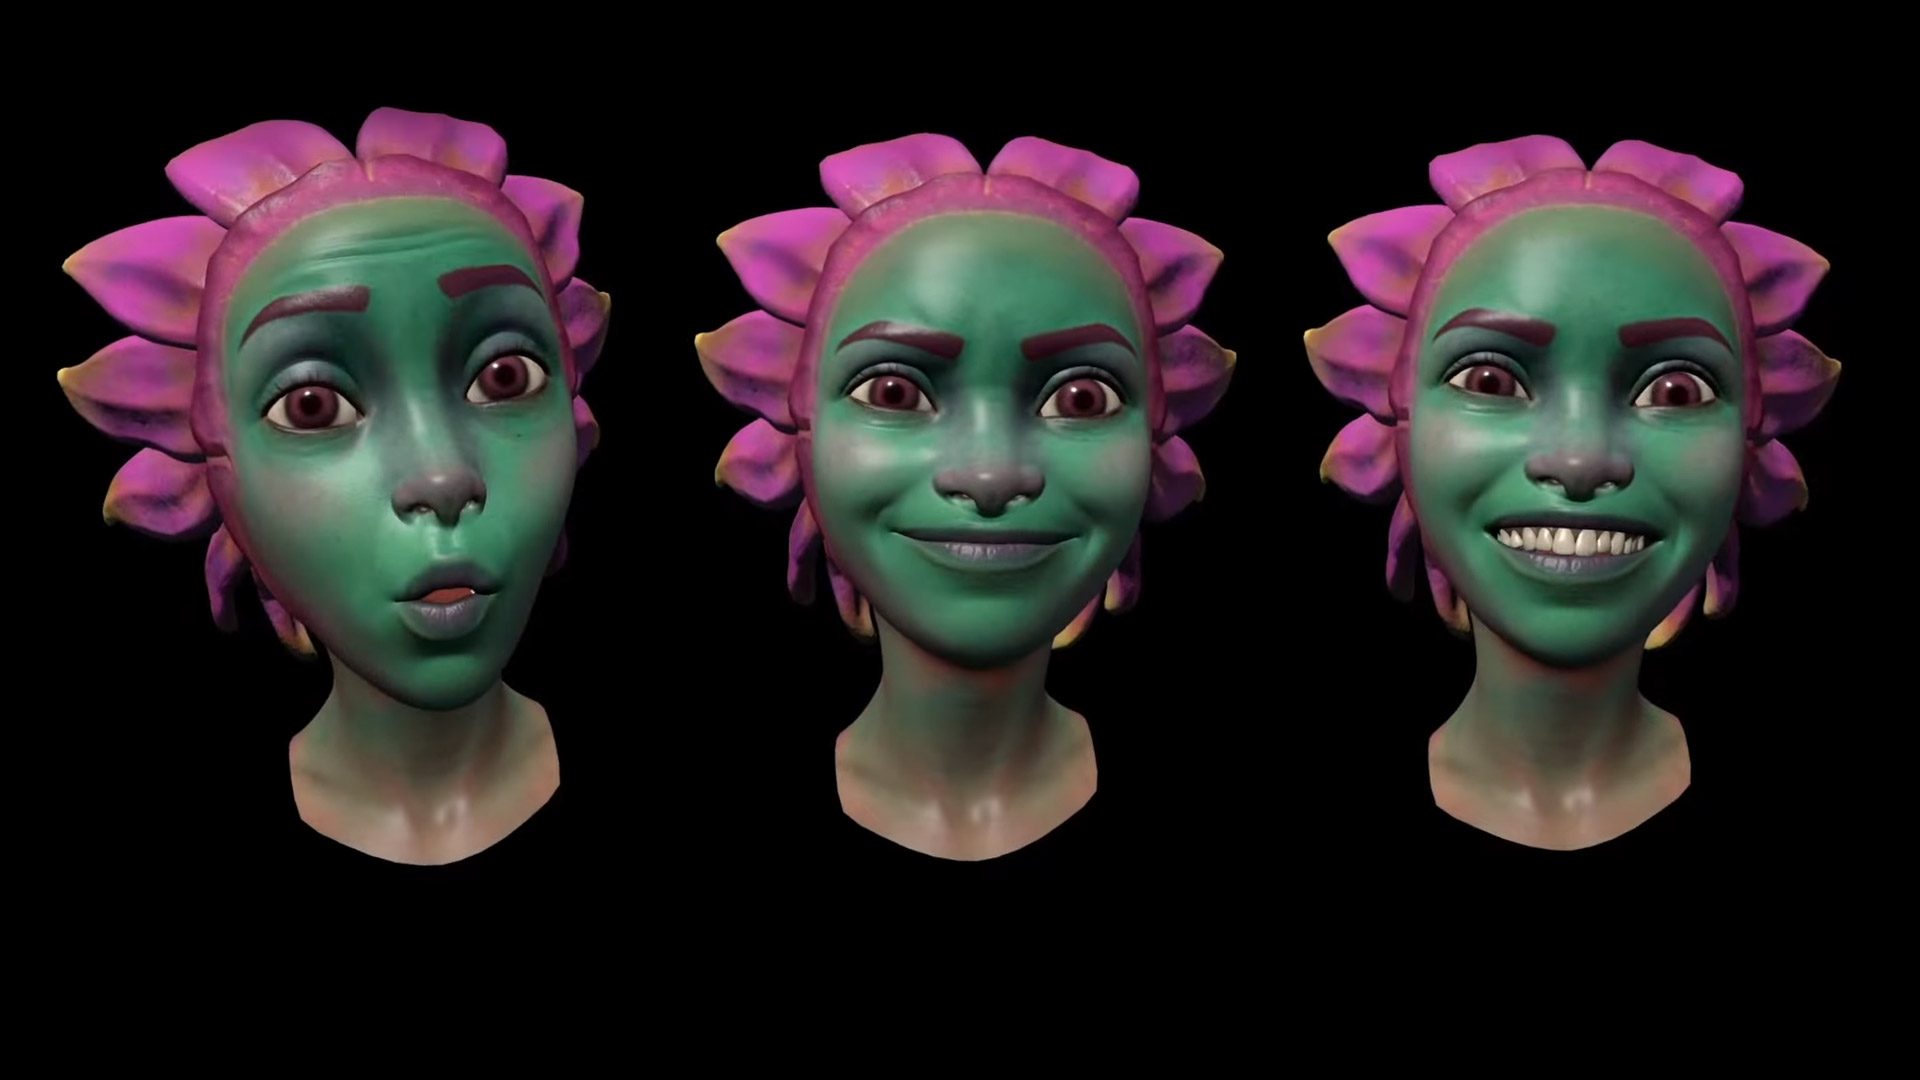 The future is now with Roblox avatar real-time facial animation